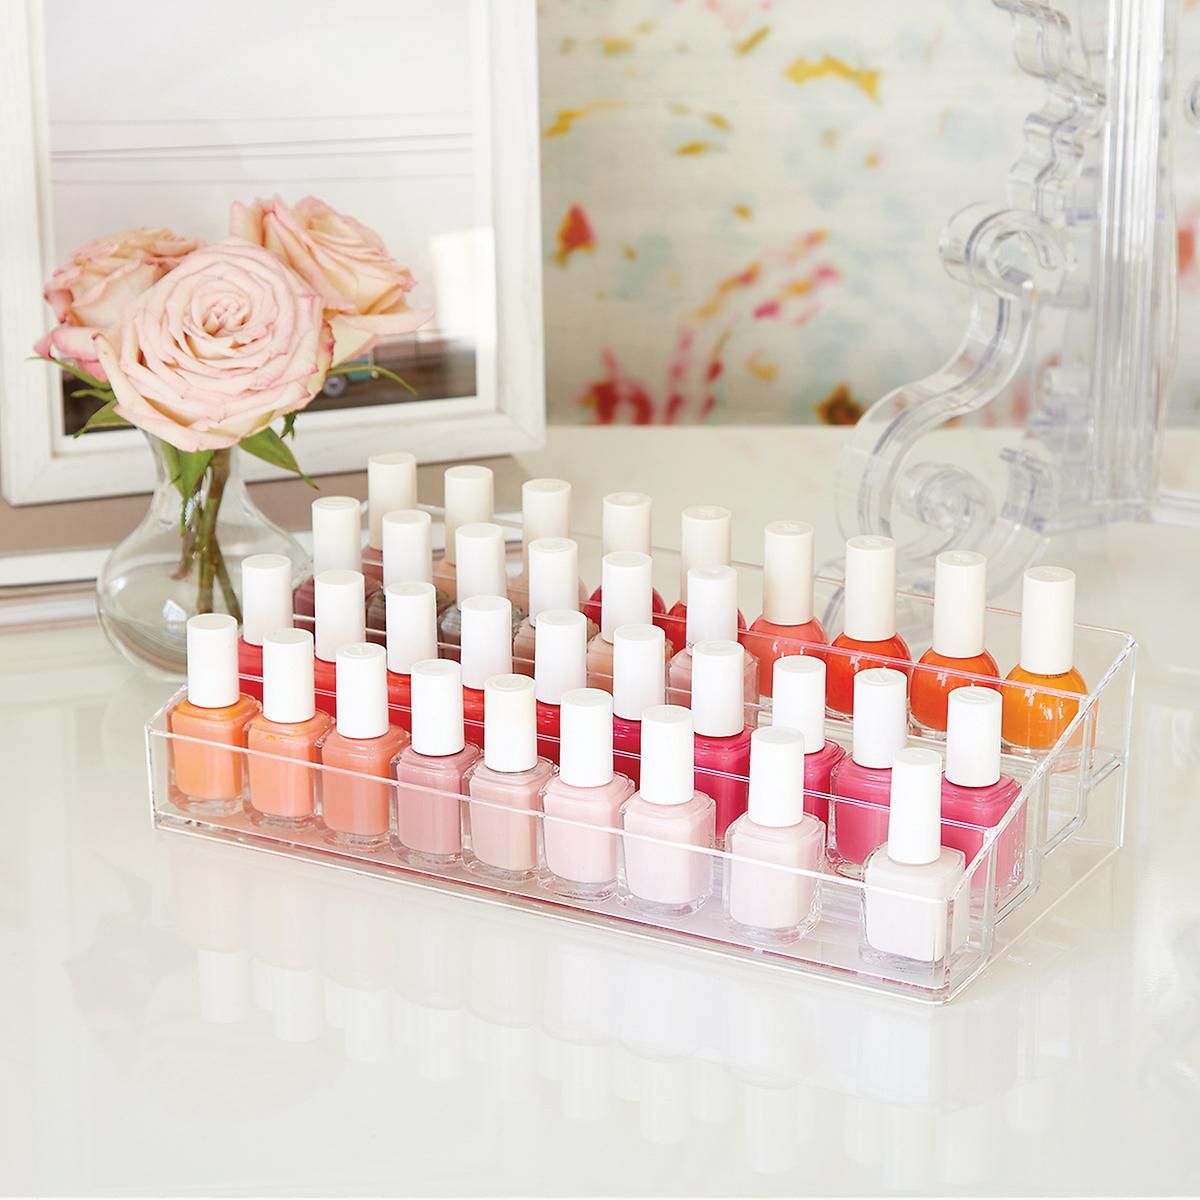 40-Bottle Acrylic Nail Polish Riser | The Container Store